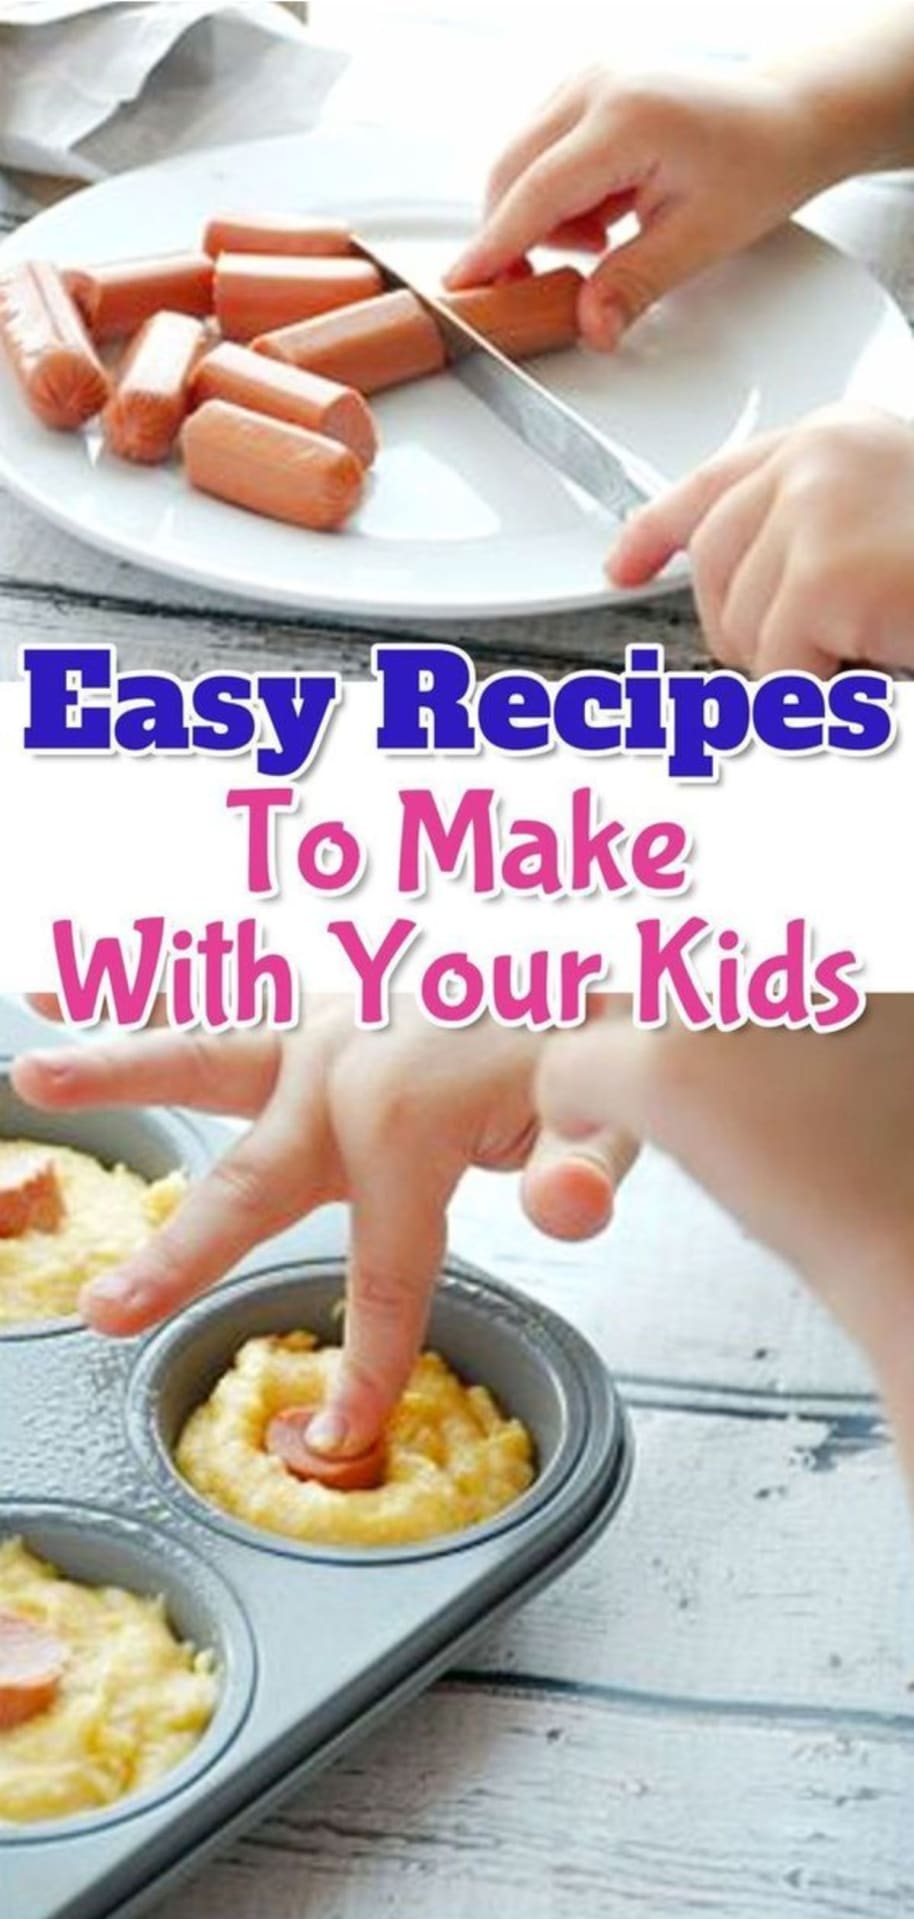 recipes for kids - easy recipes kids can cook